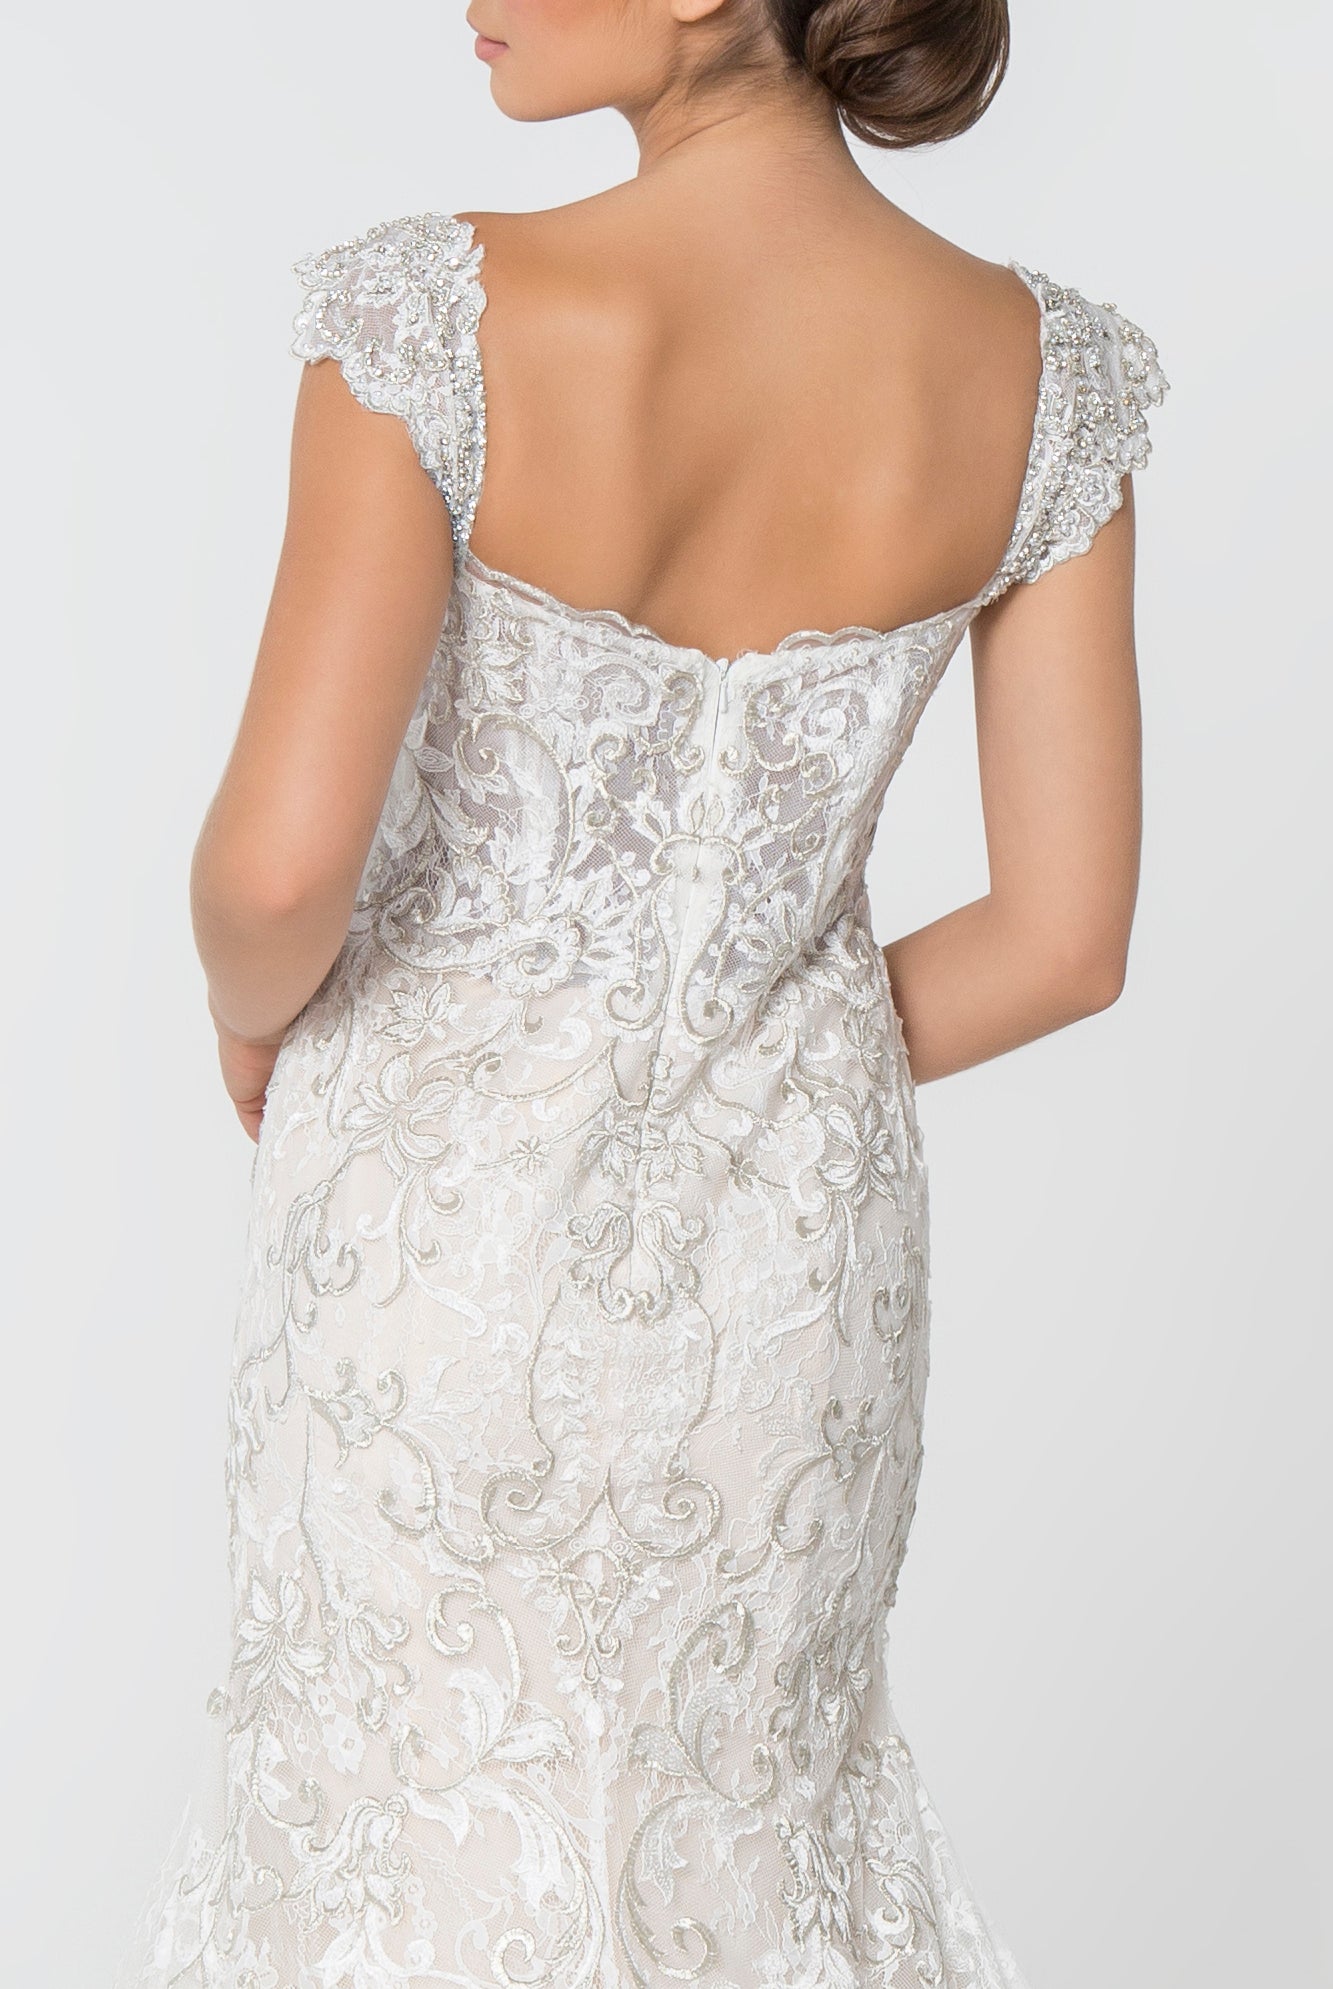 Jewel and Embroidery Embellished Mesh Wedding Gown GLGL2822-WEDDING GOWNS-smcfashion.com